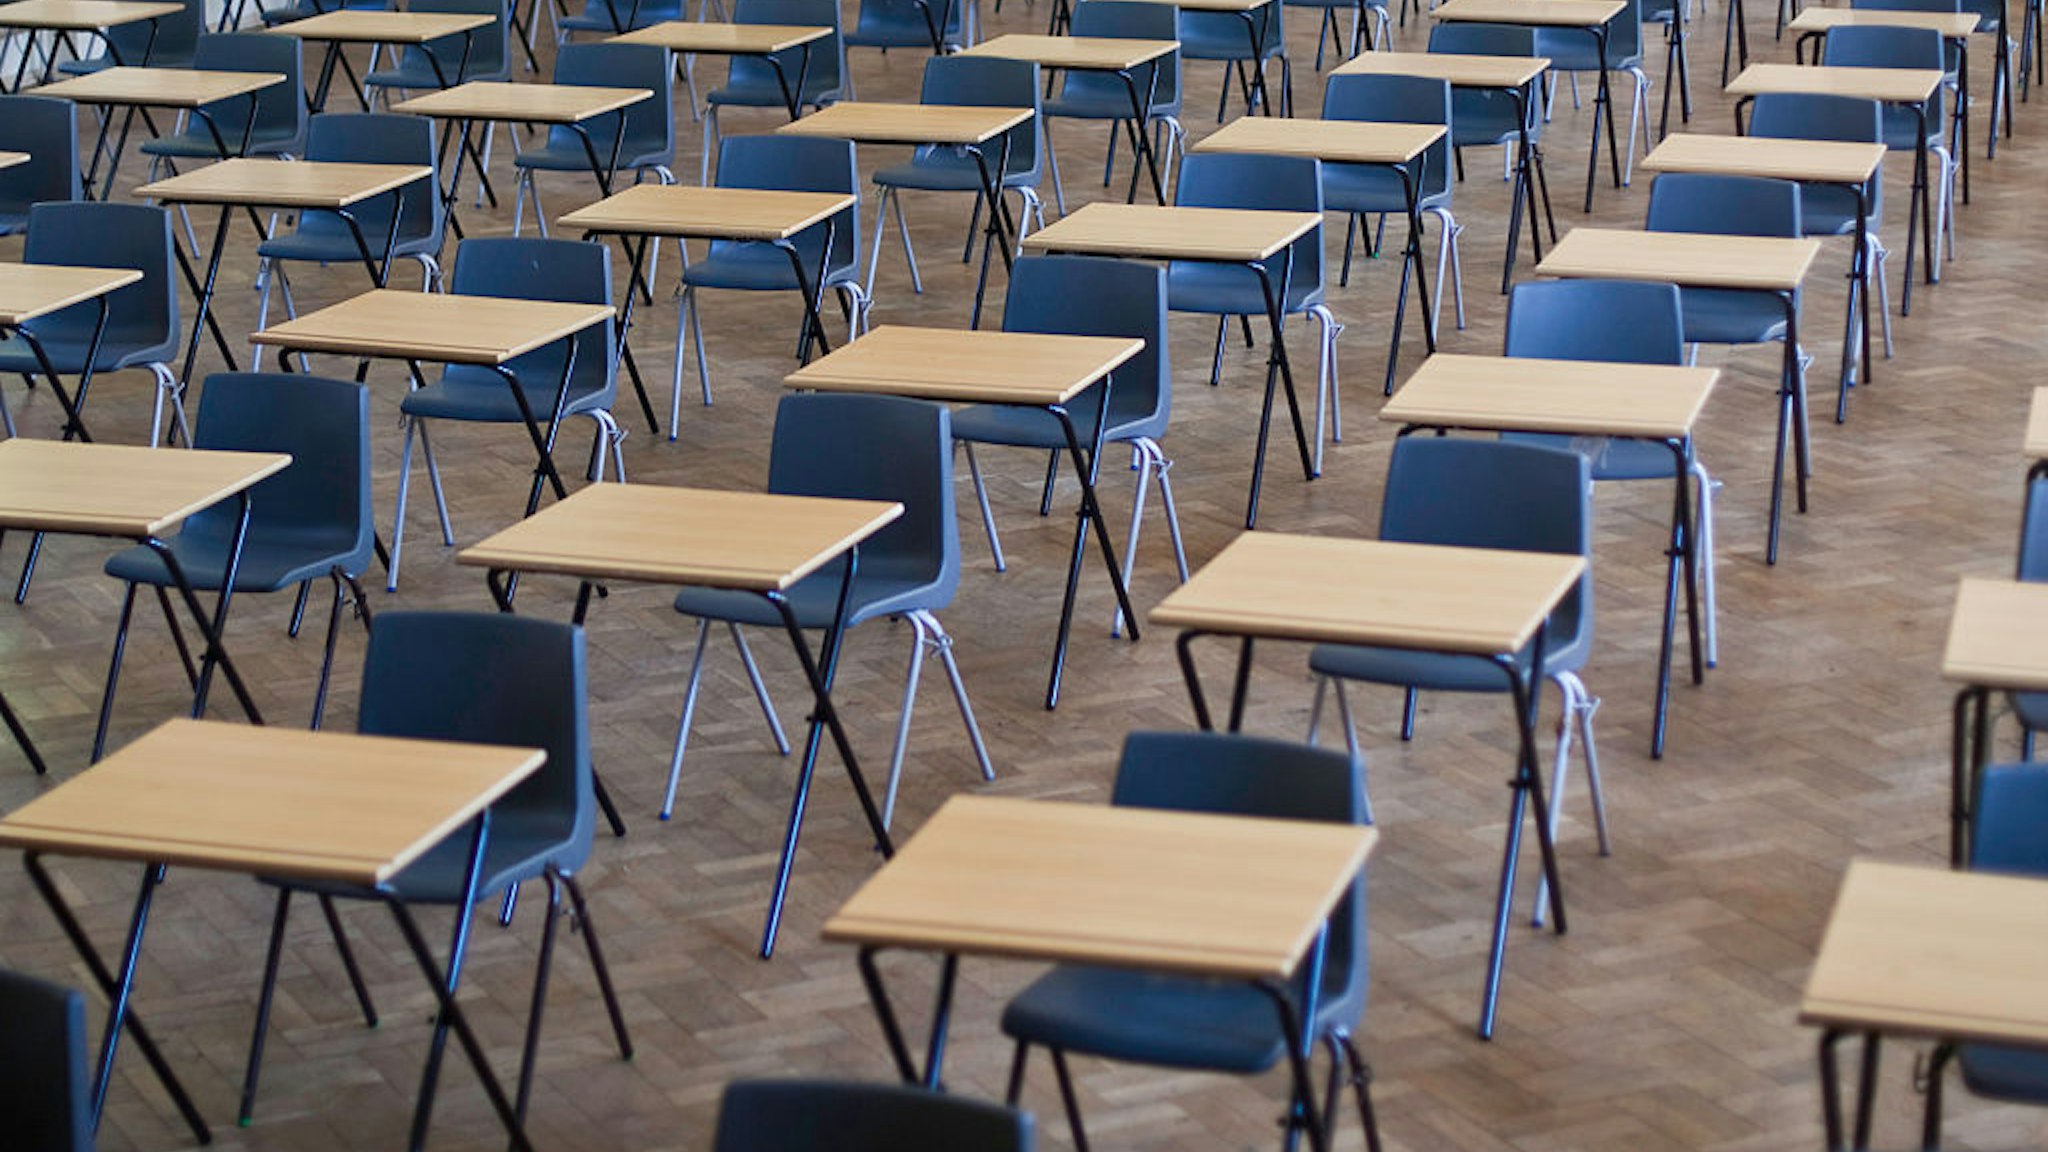 Desks and chairs set out for exams in a school hall in the United Kigdom. (Photo by In Pictures Ltd./Corbis via Getty Images)